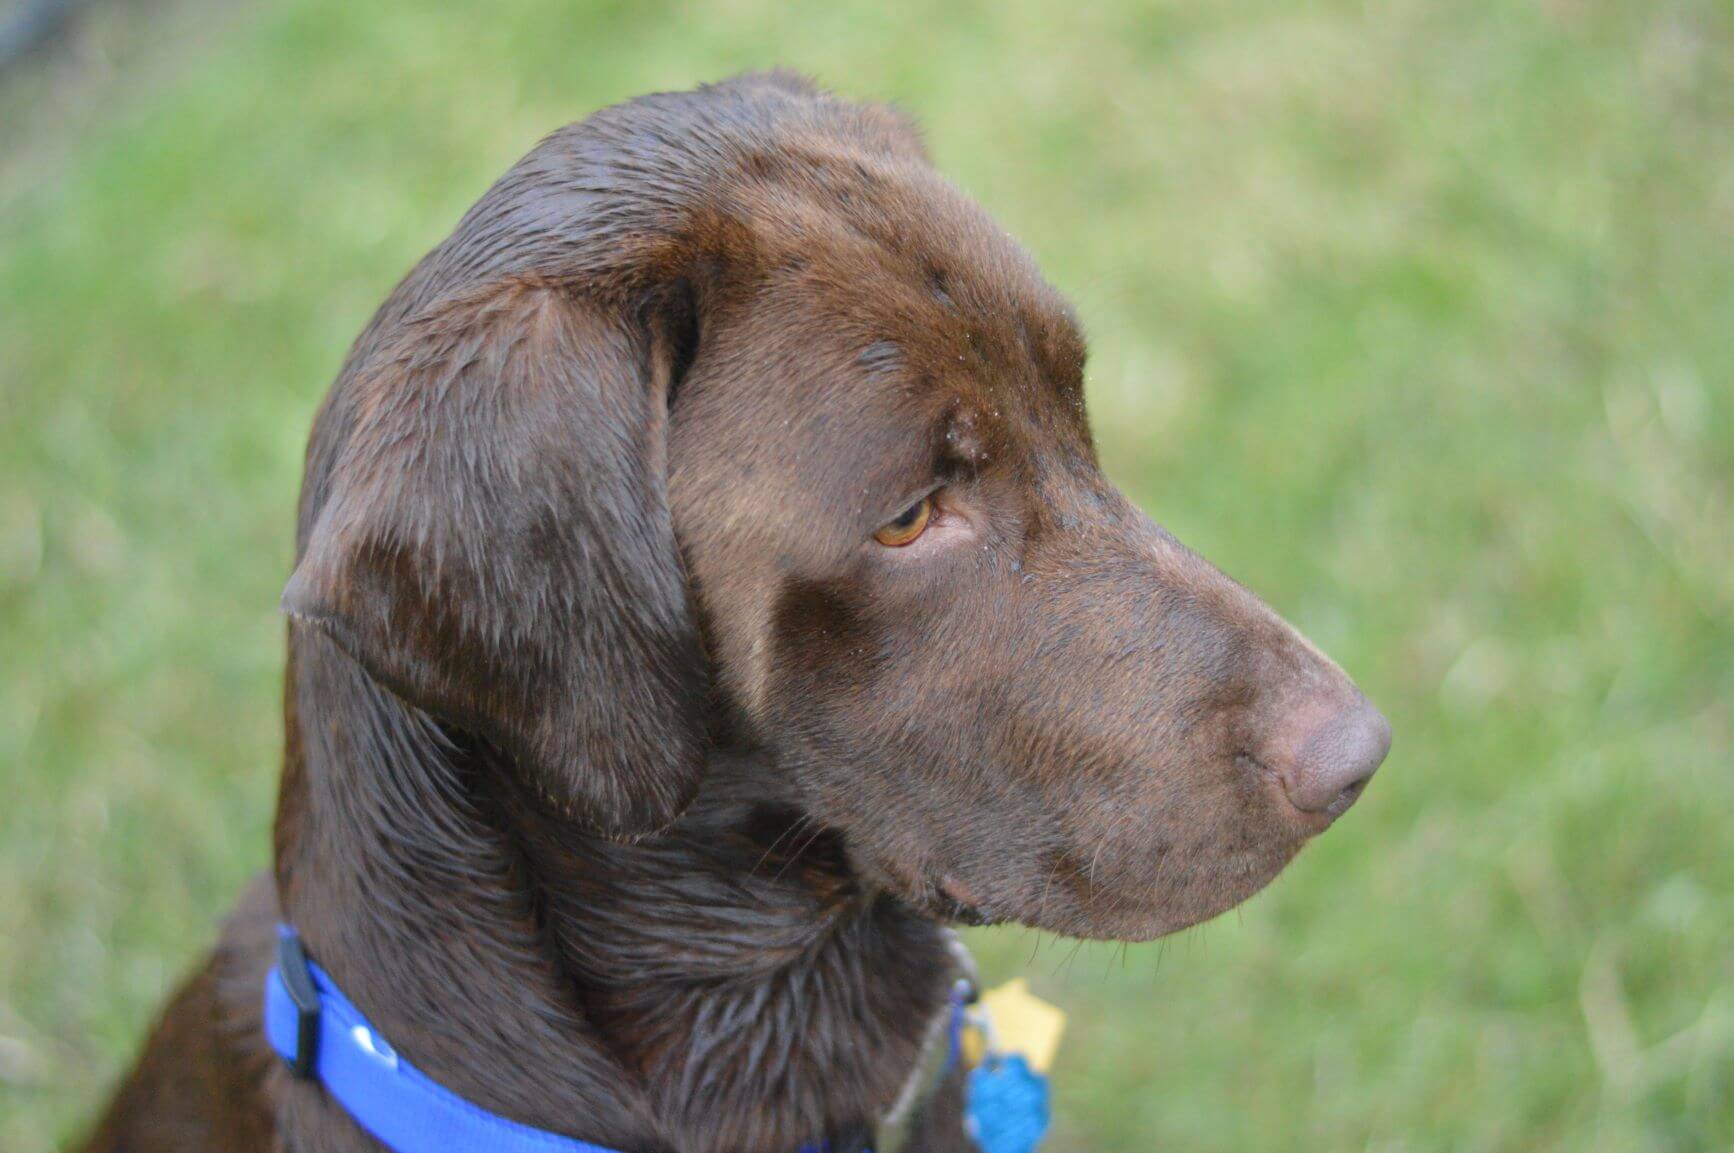 Chocolate Labrador in the grass soaking wet after swimming and getting out of the pool.